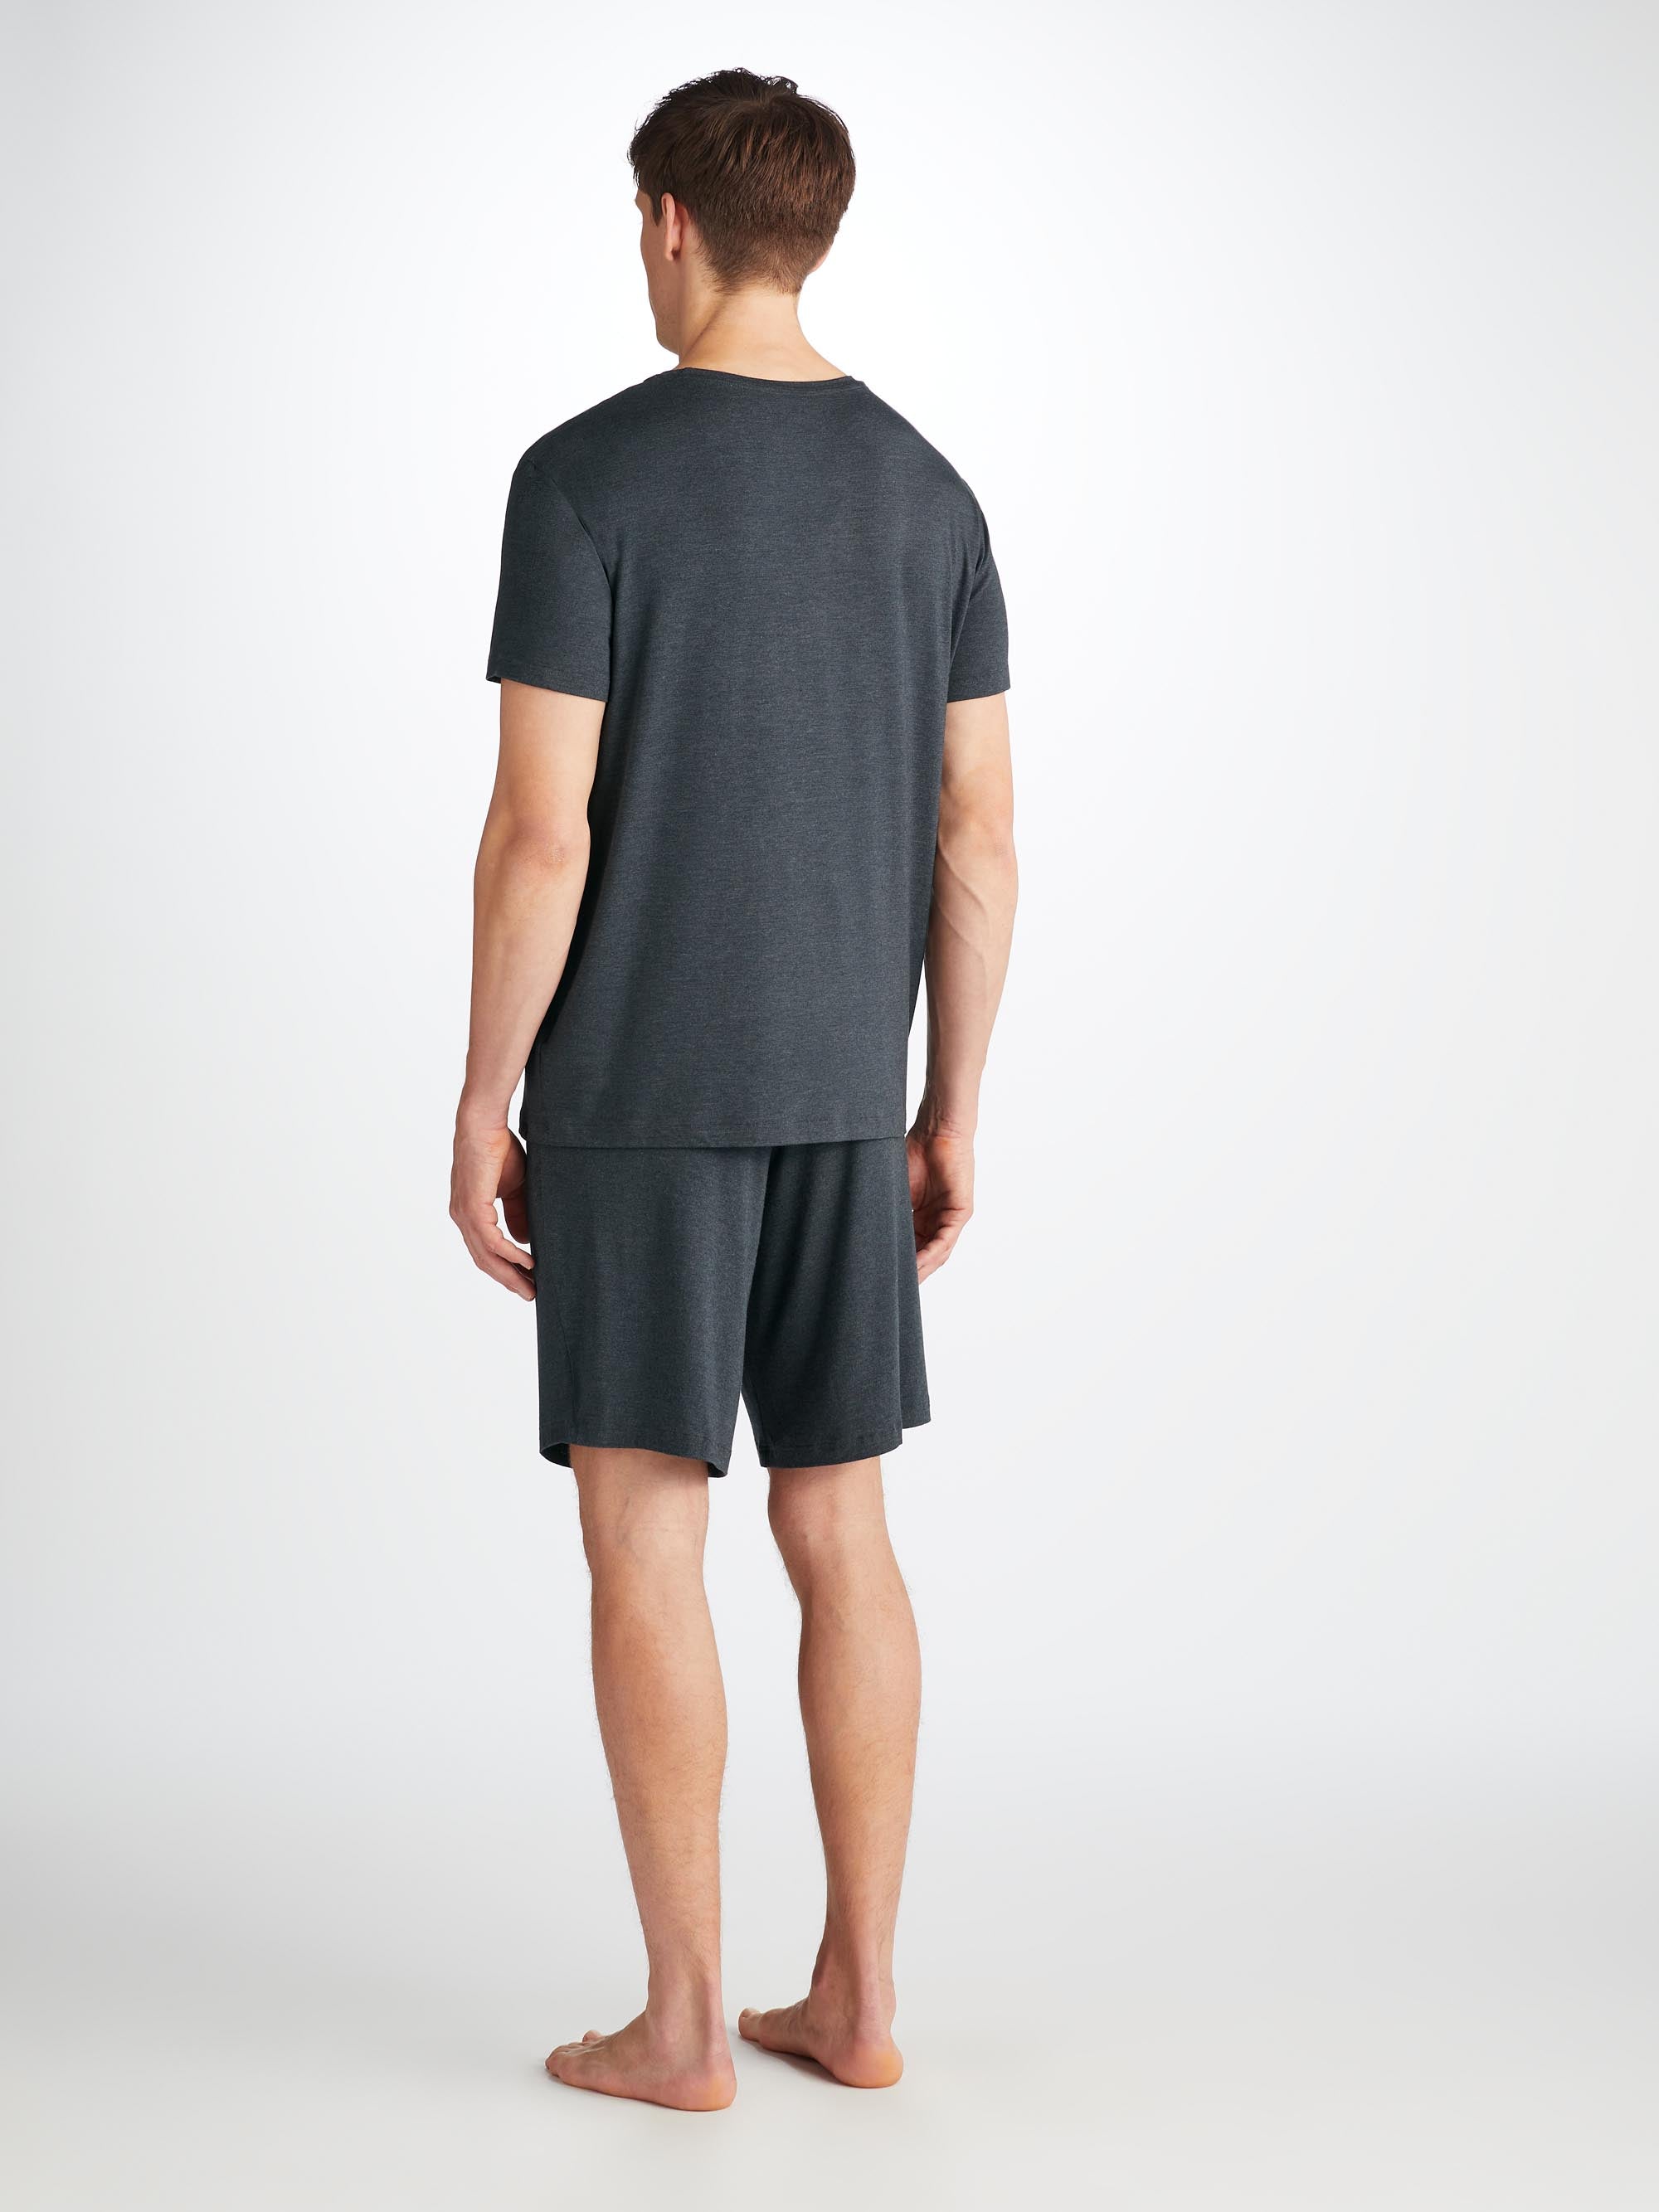 Men's Lounge Shorts Marlowe Micro Modal Stretch Anthracite